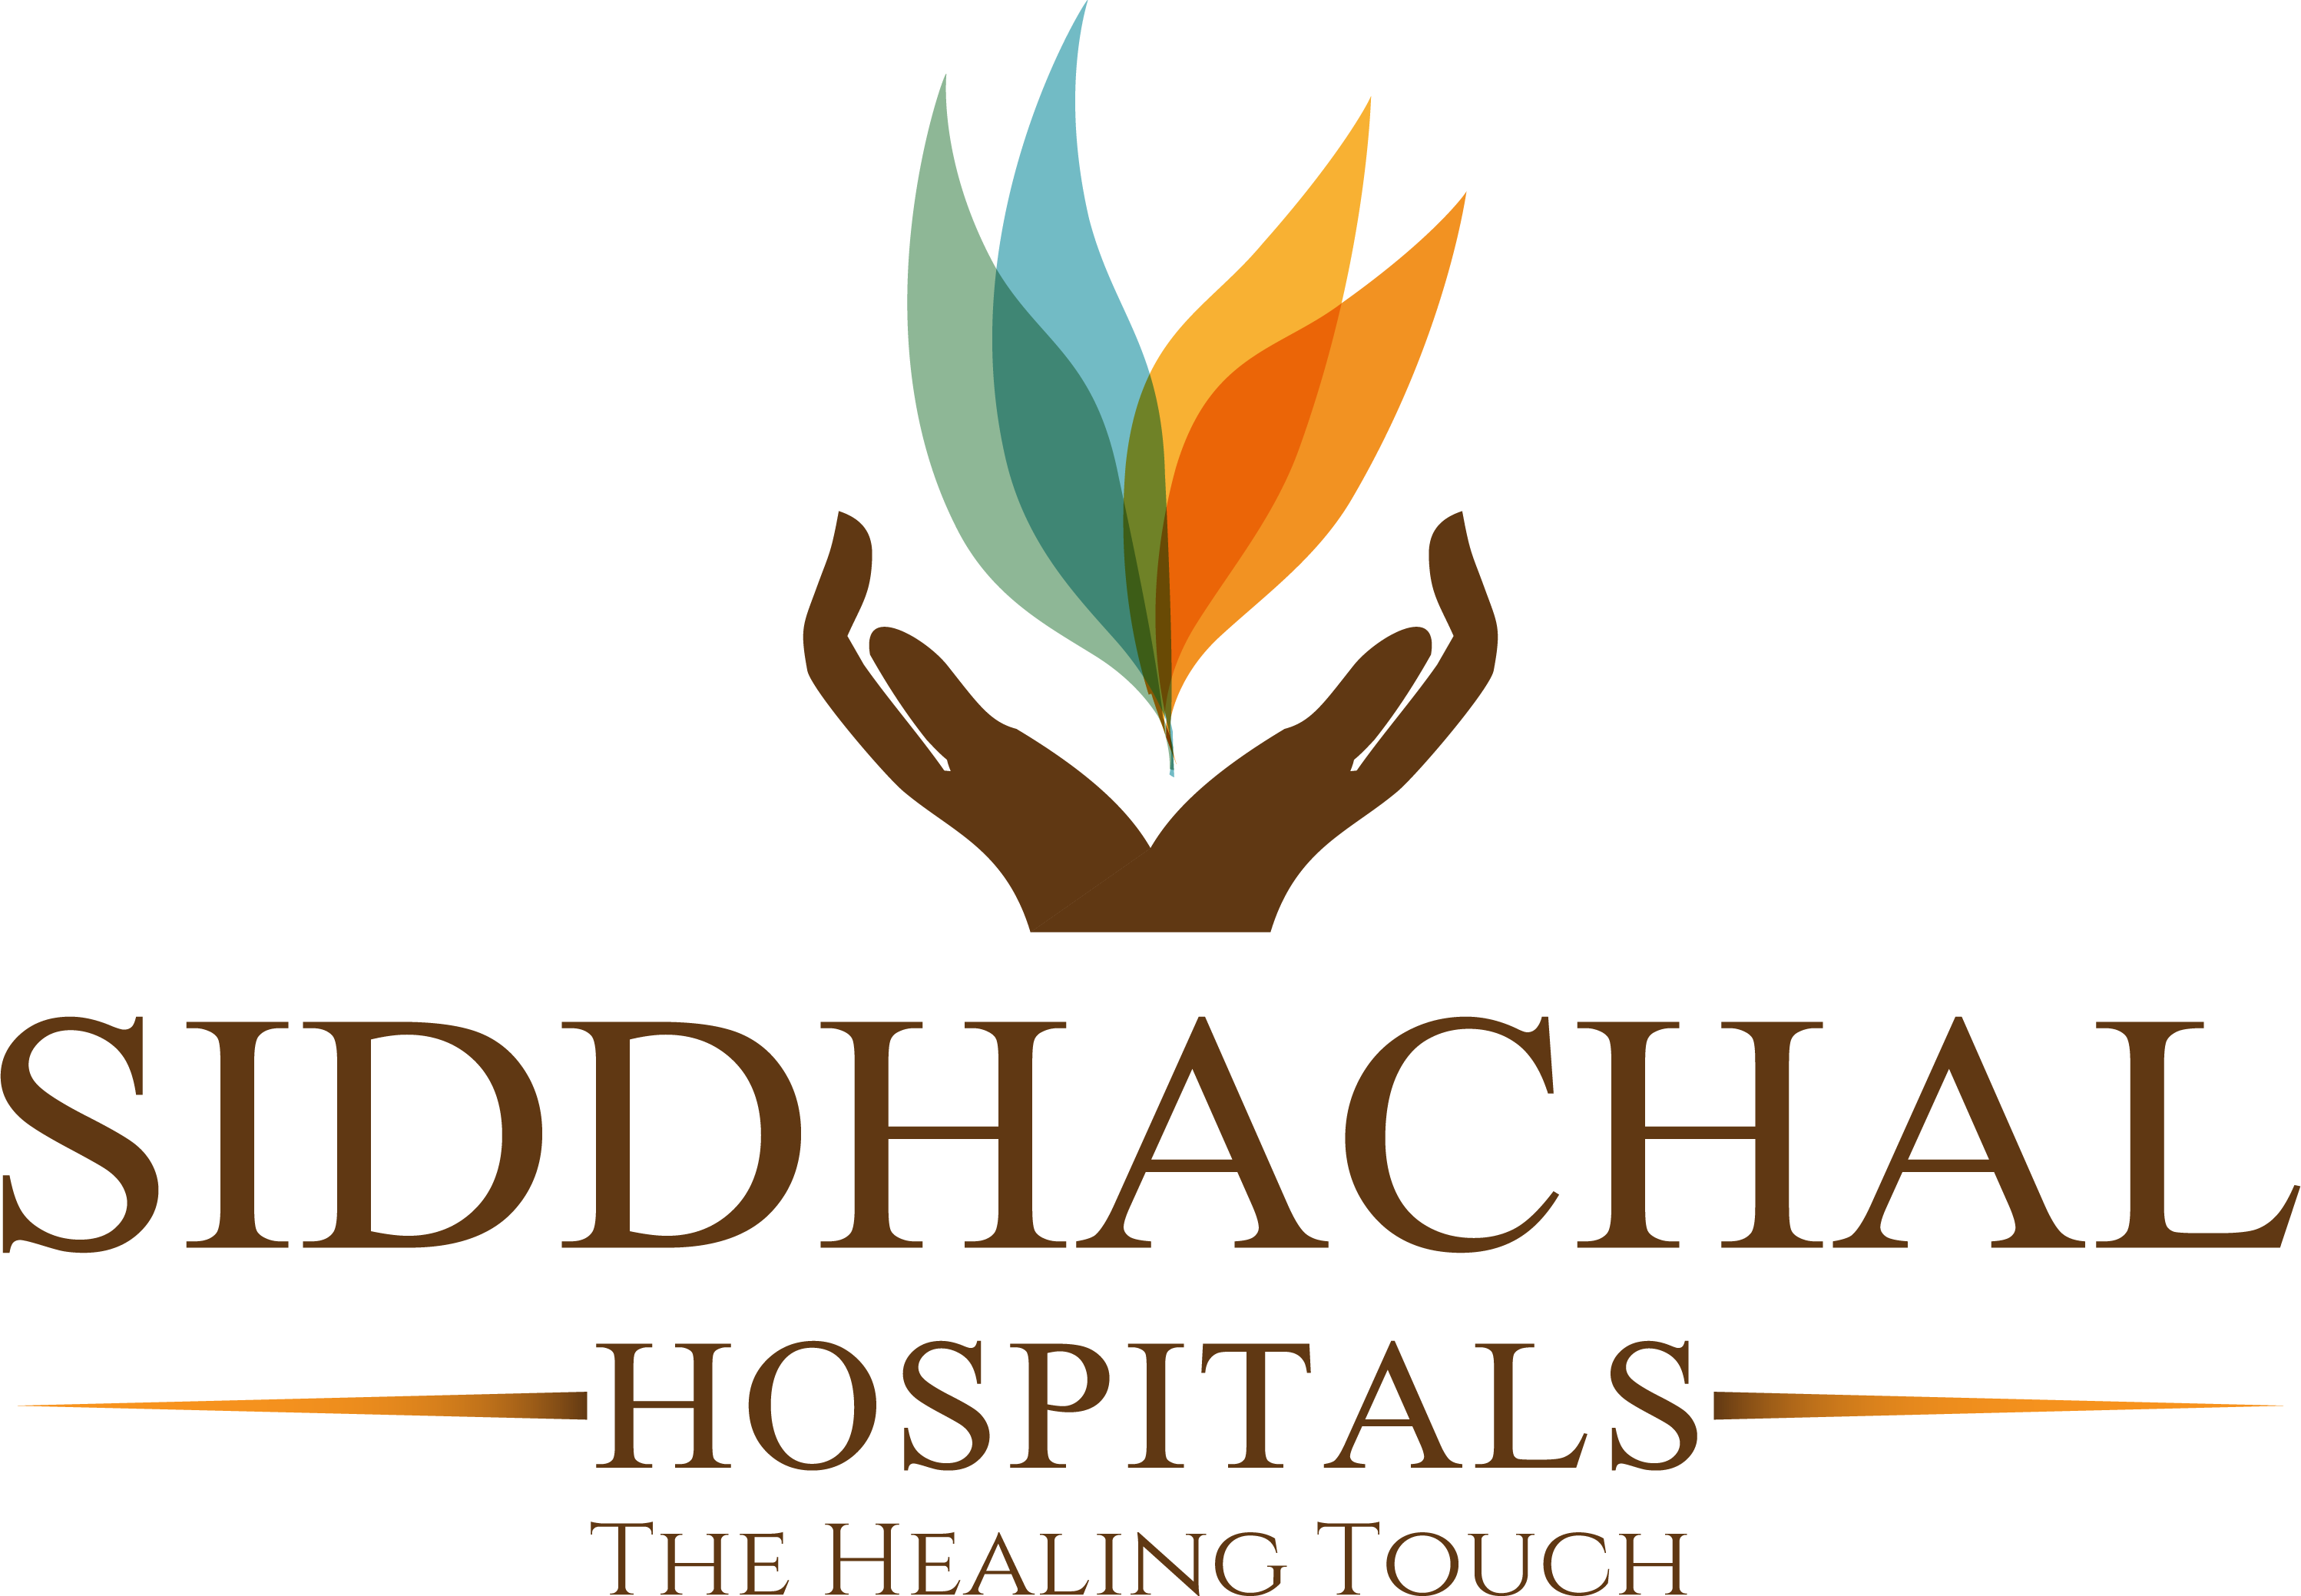 Siddhachal Hospitals - The Healing Touch